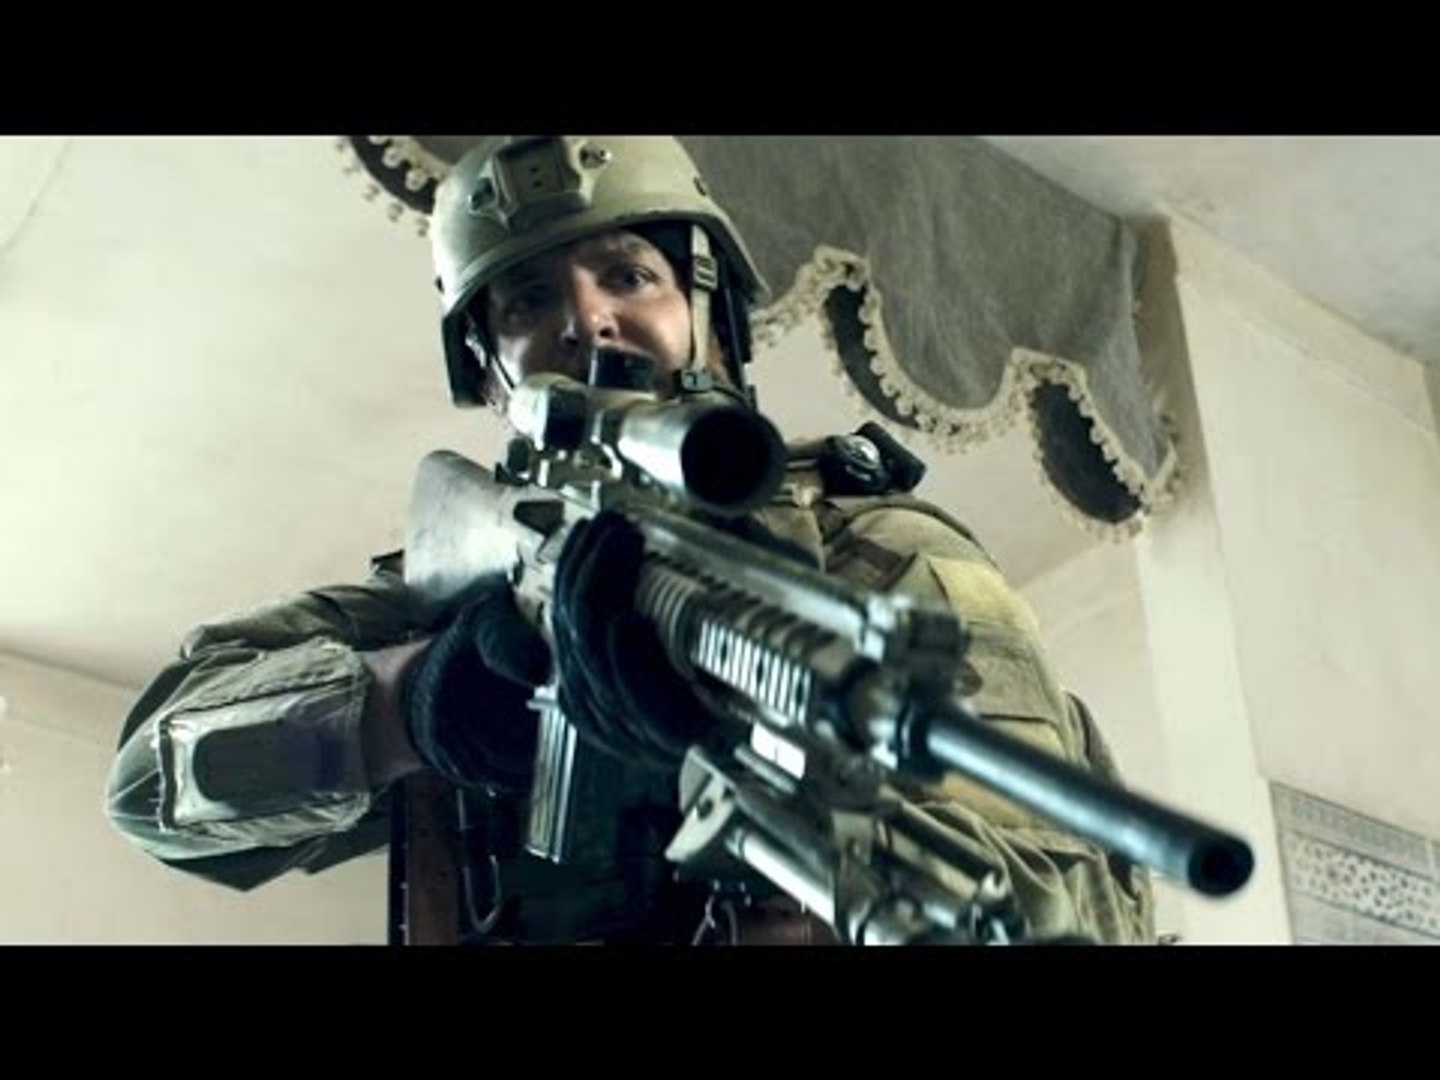 Clint Eastwood's AMERICAN SNIPER Trailer # 2 - video dailymotion